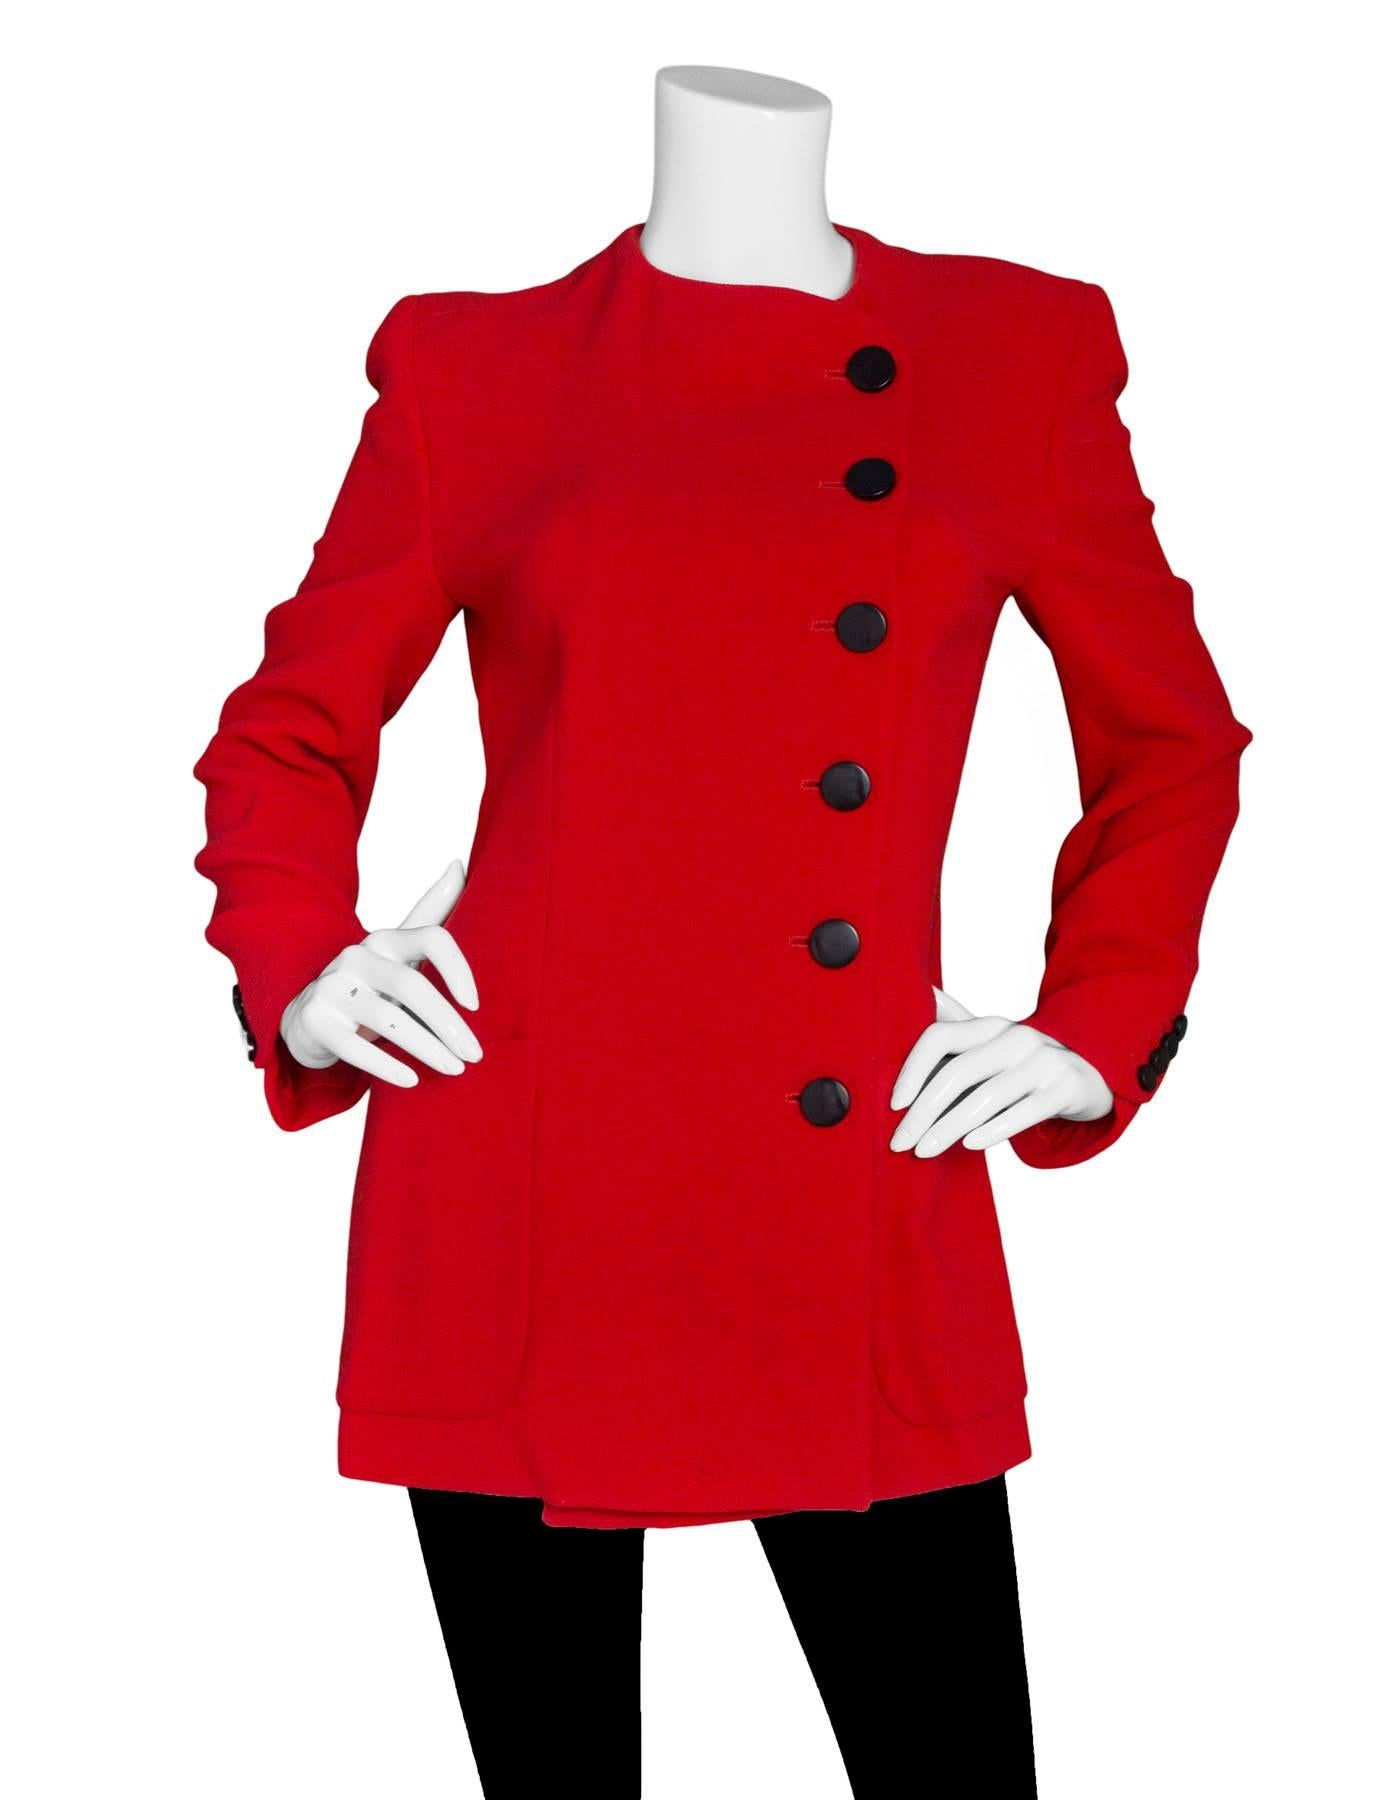 Giorgio Armani Vintage Red Asymmetrical Jacket Sz IT42

Made In: Italy
Color: Red
Composition: Not listed, feels like wool blend
Lining: Red textile
Closure/Opening: Front button closure
Exterior Pockets: Hip patch pockets
Interior Pockets: